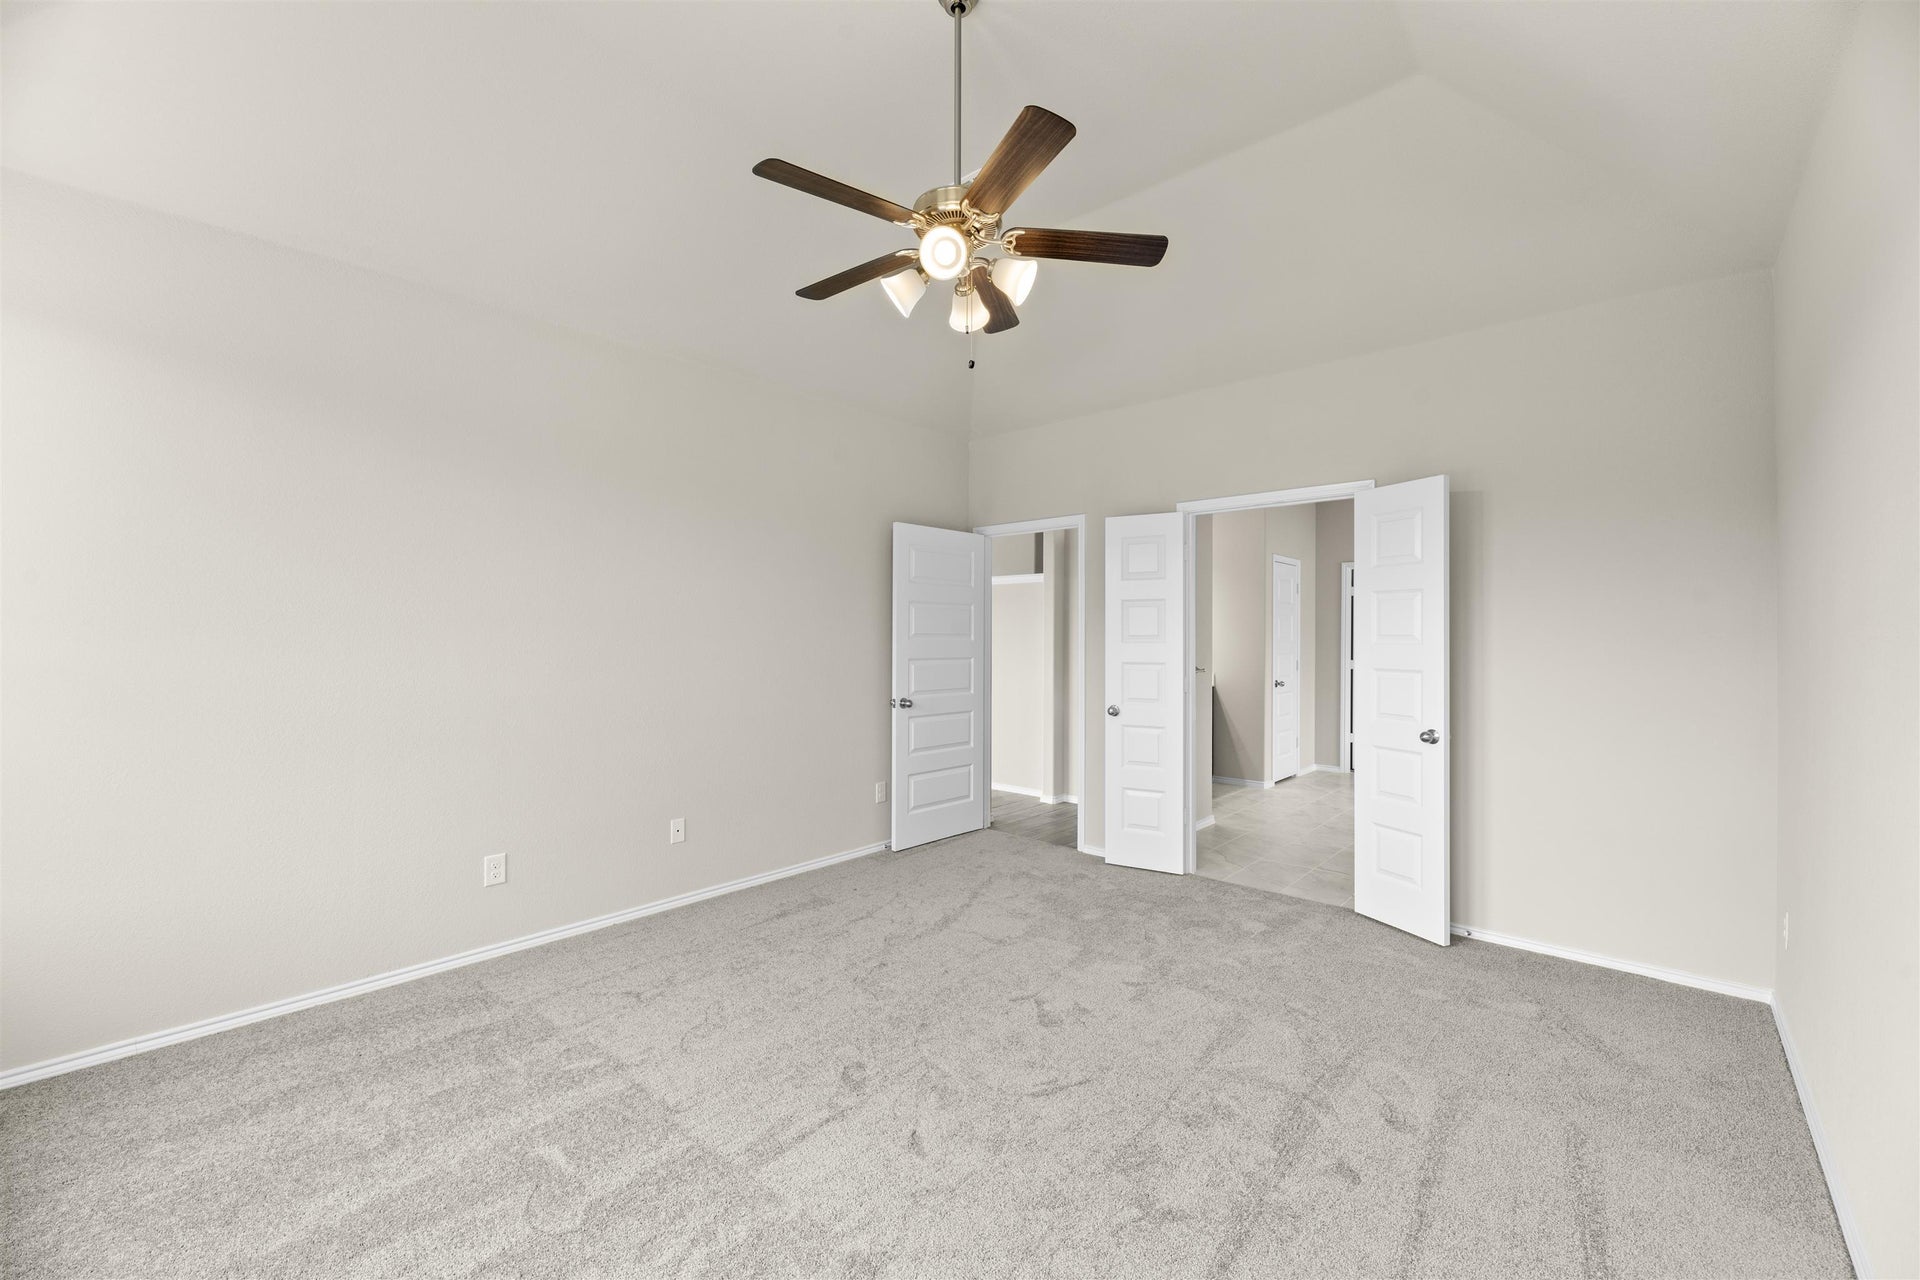 4br New Home in Crowley, TX